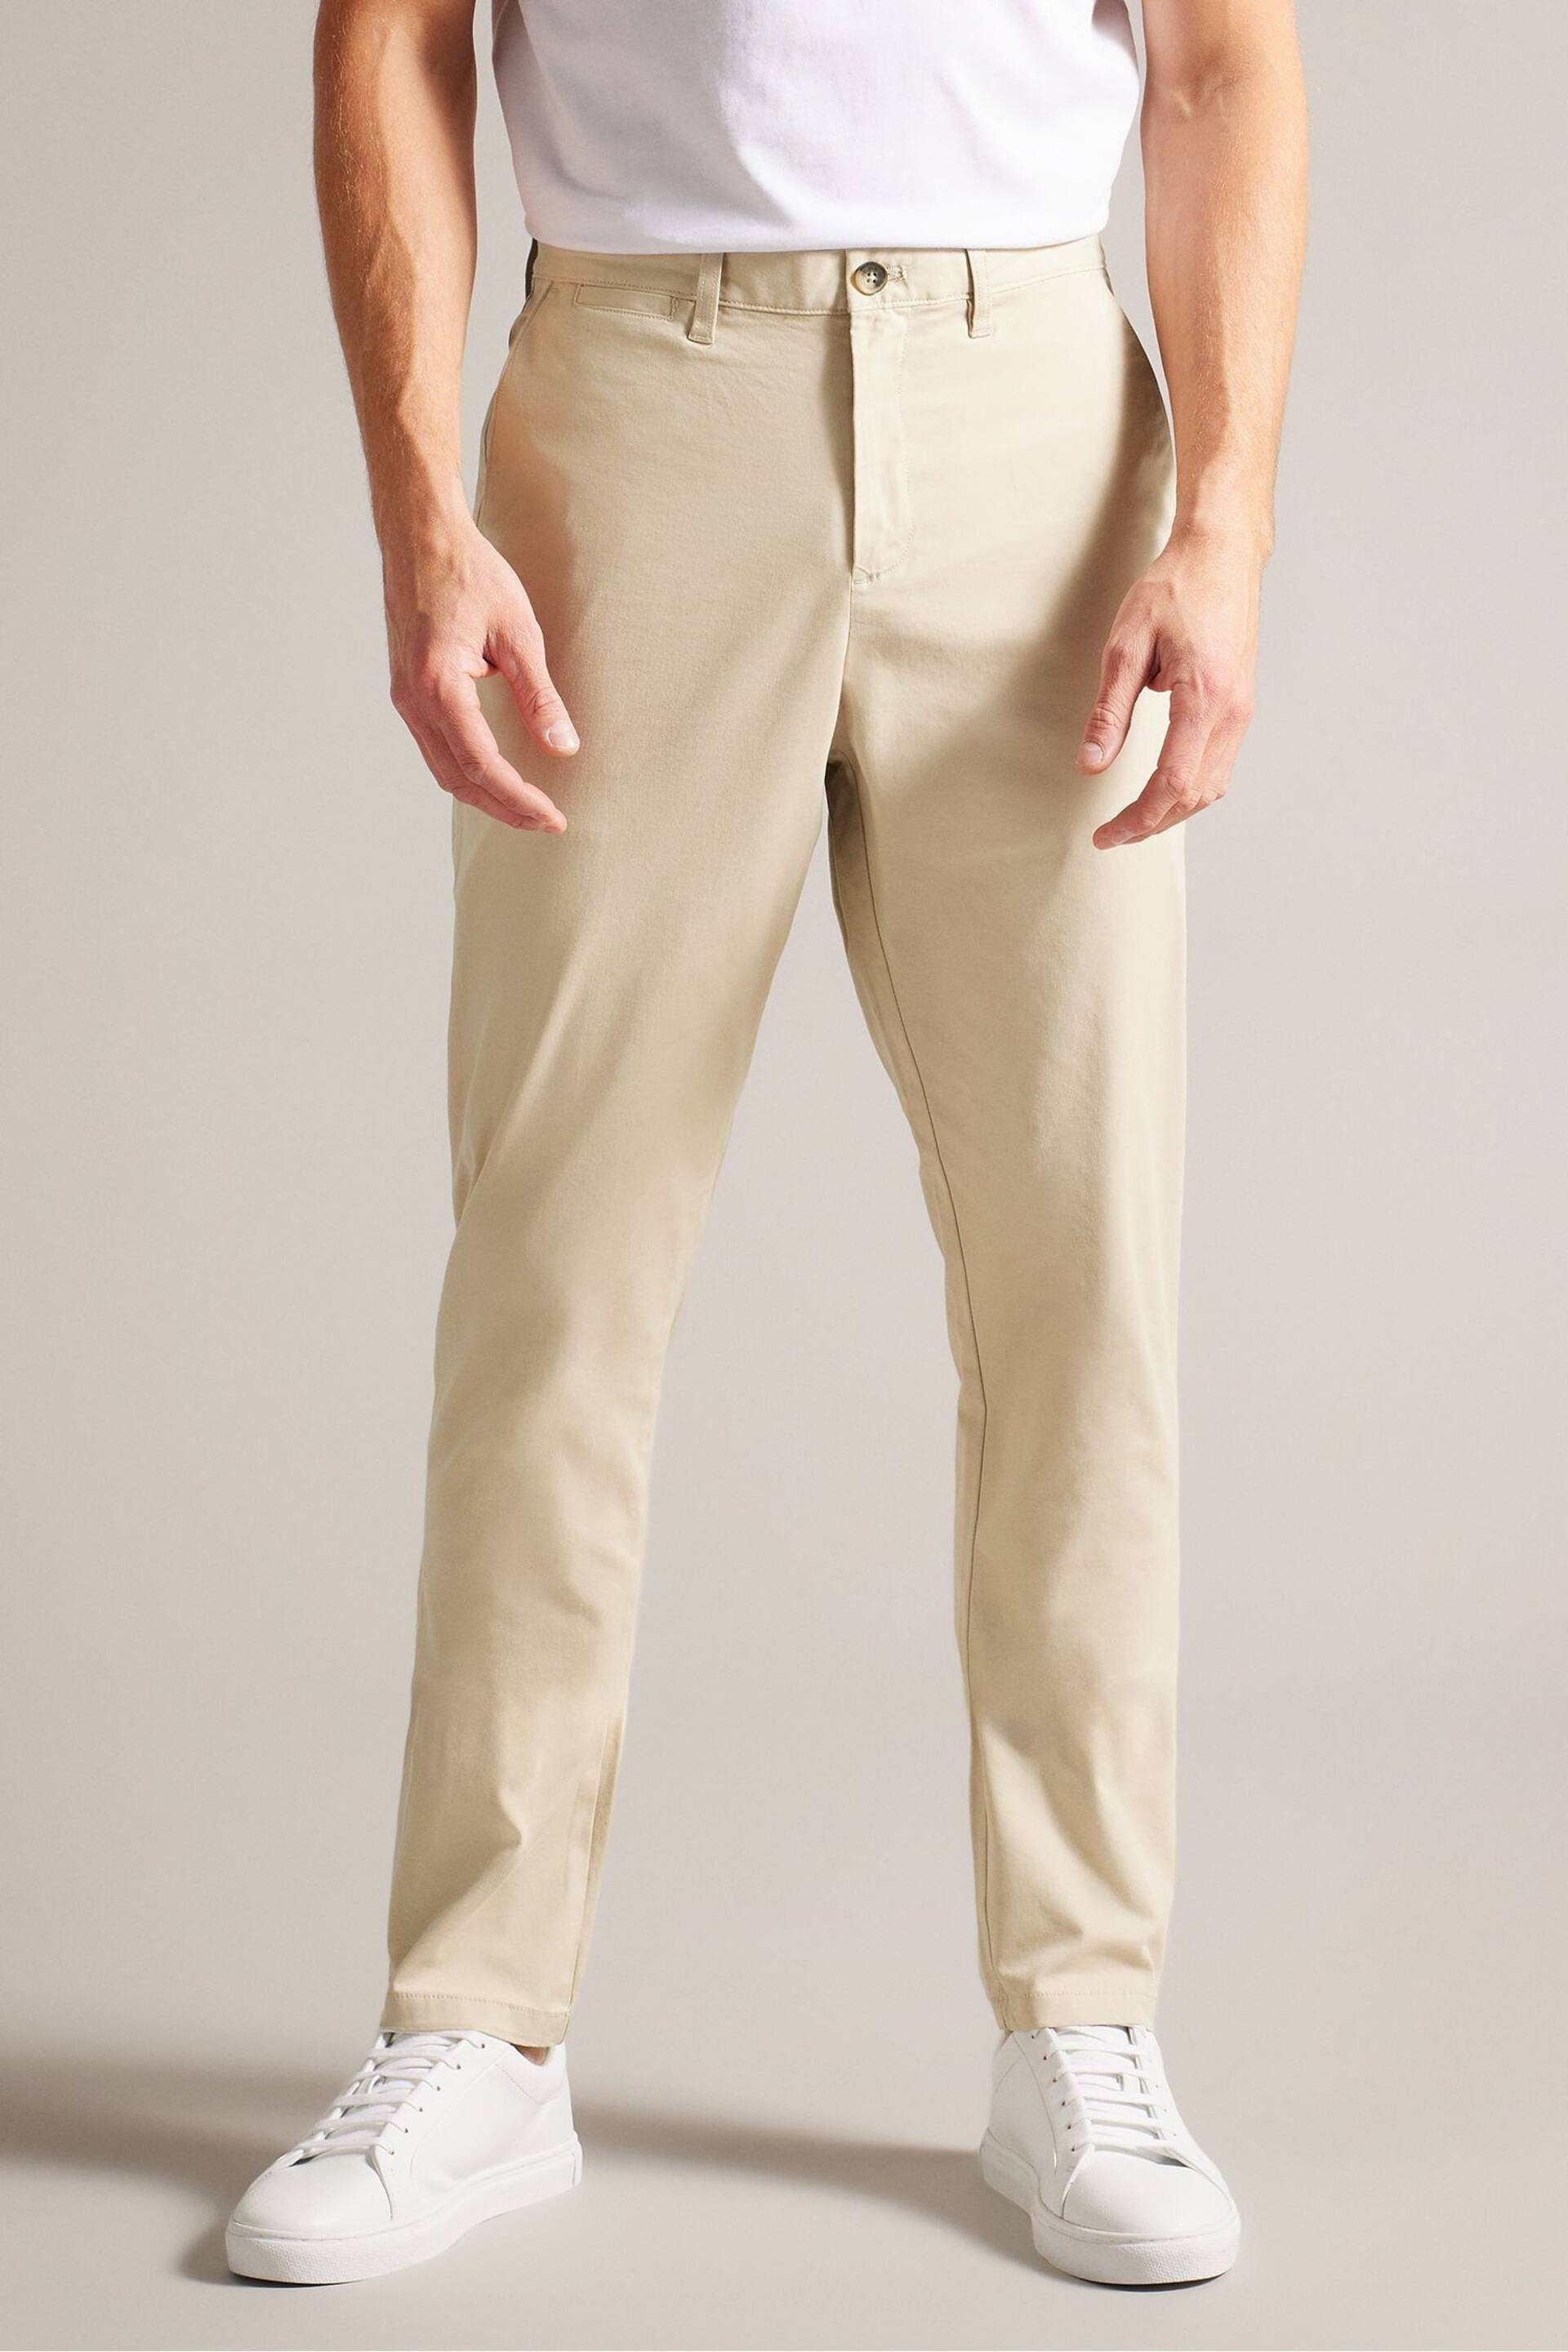 Ted Baker Cream Regular Fit Haybrn Textured Chino Trousers - Image 2 of 5